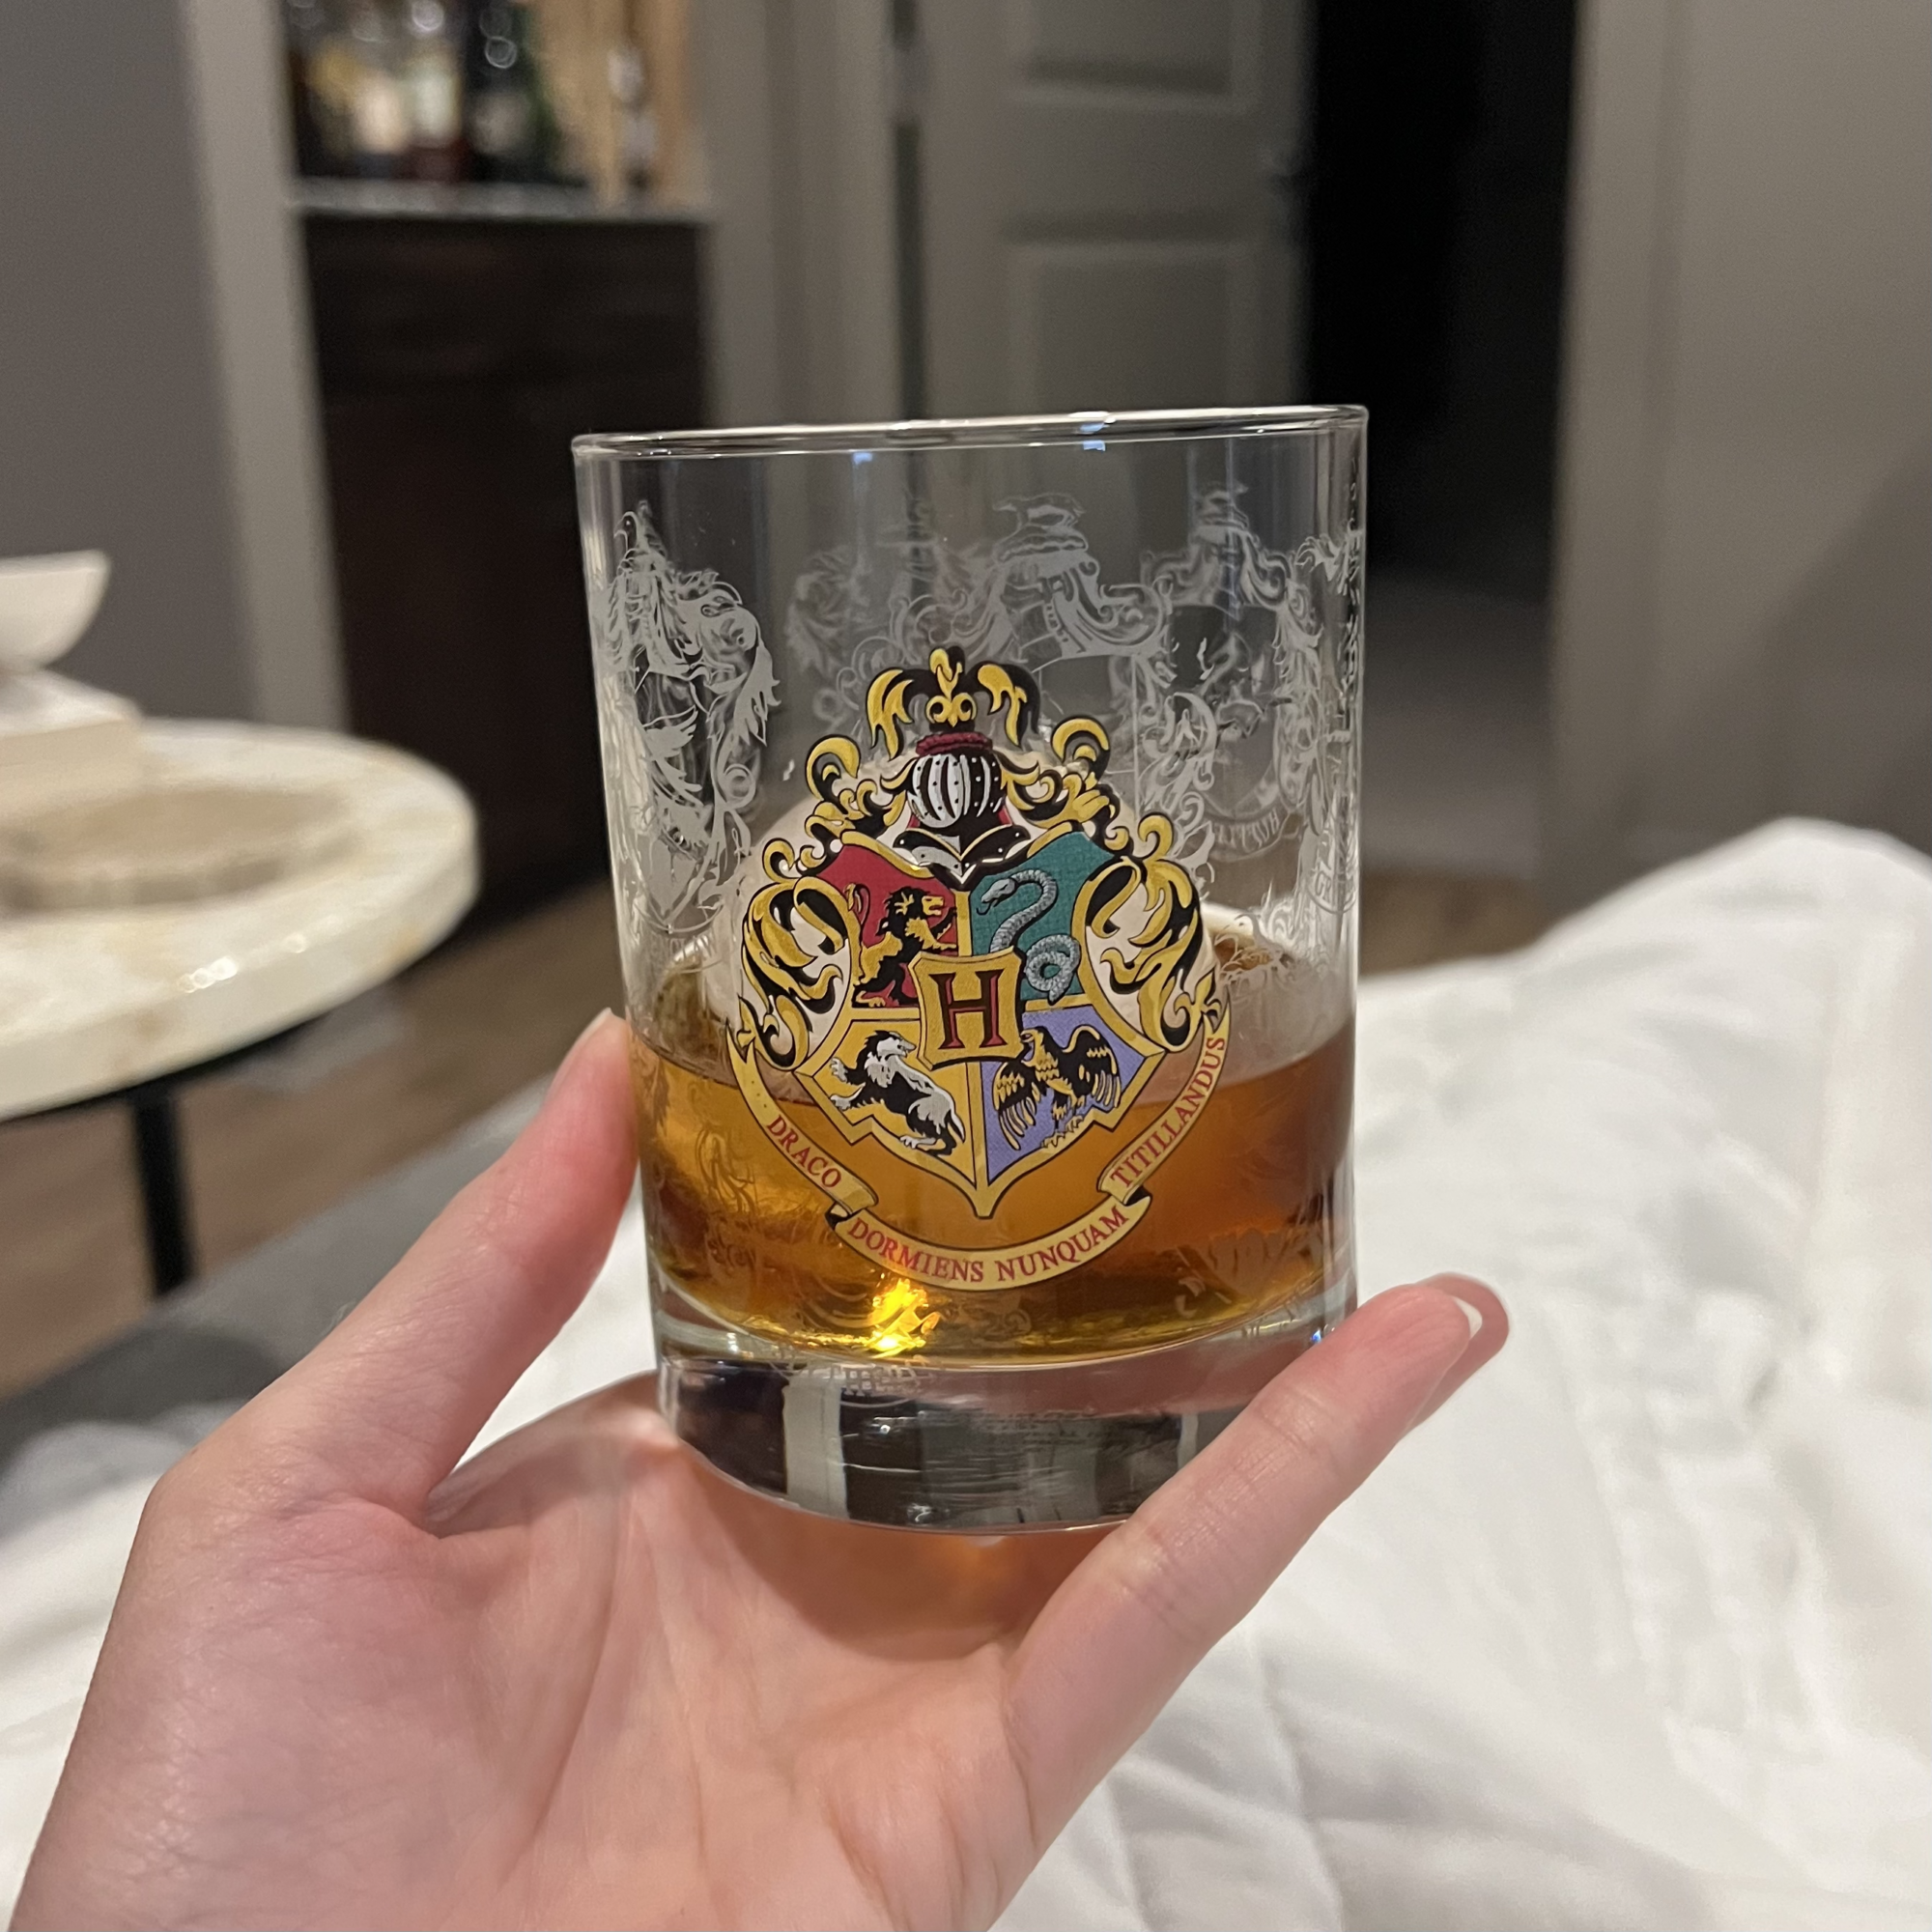 Photo of a hand holding a small bourbon glass decorated with a Hogwarts emblem.